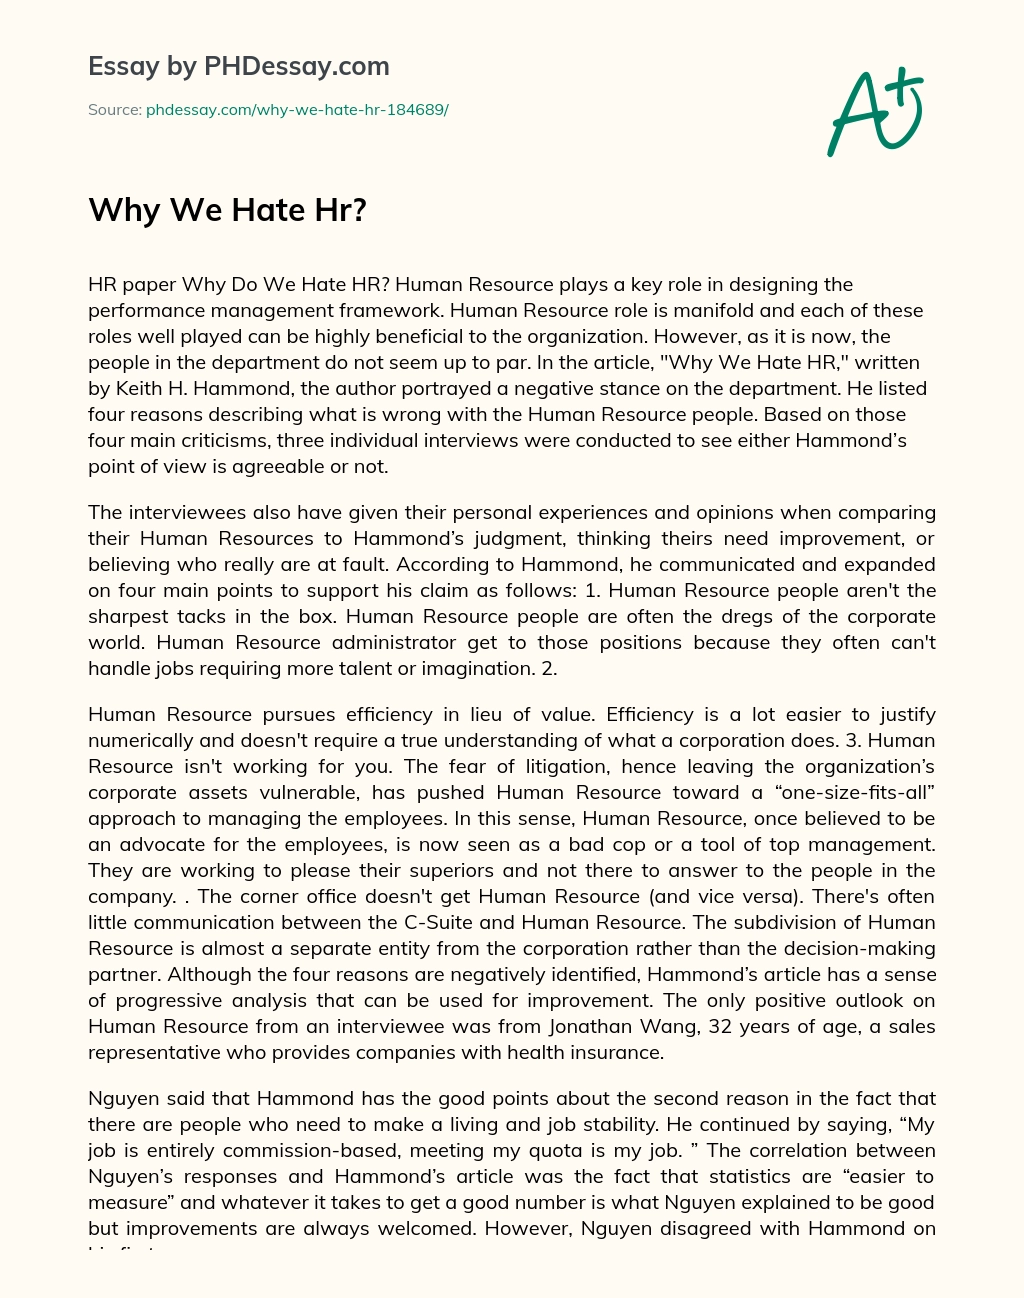 Why We Hate Hr? essay